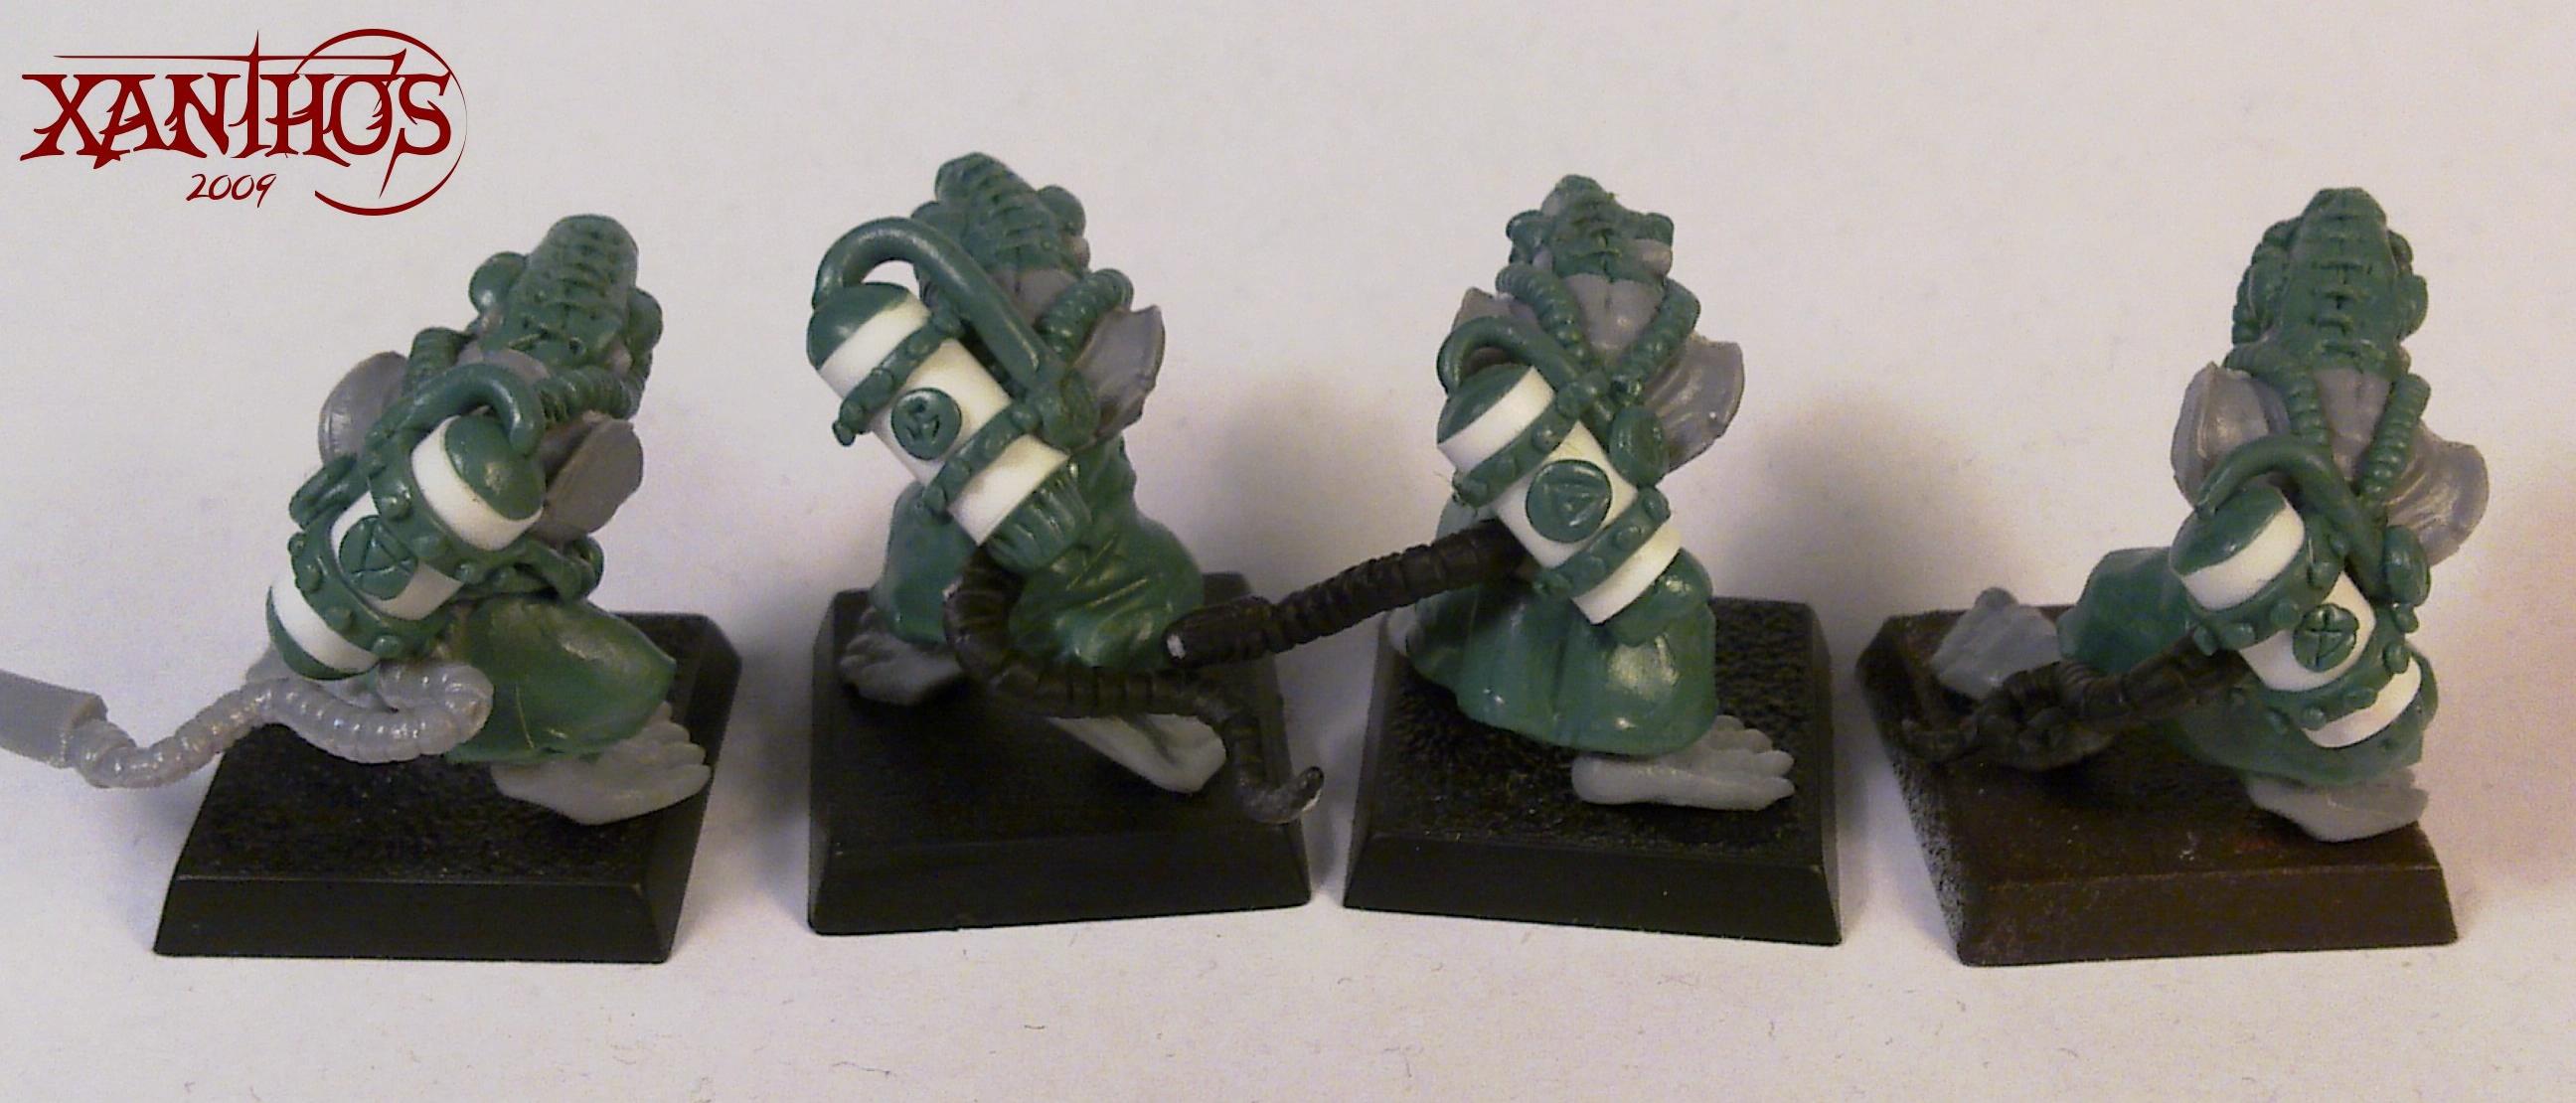 Warhammer Fantasy, And a back shot, showing their breathing apparatus. Rivets and runes!